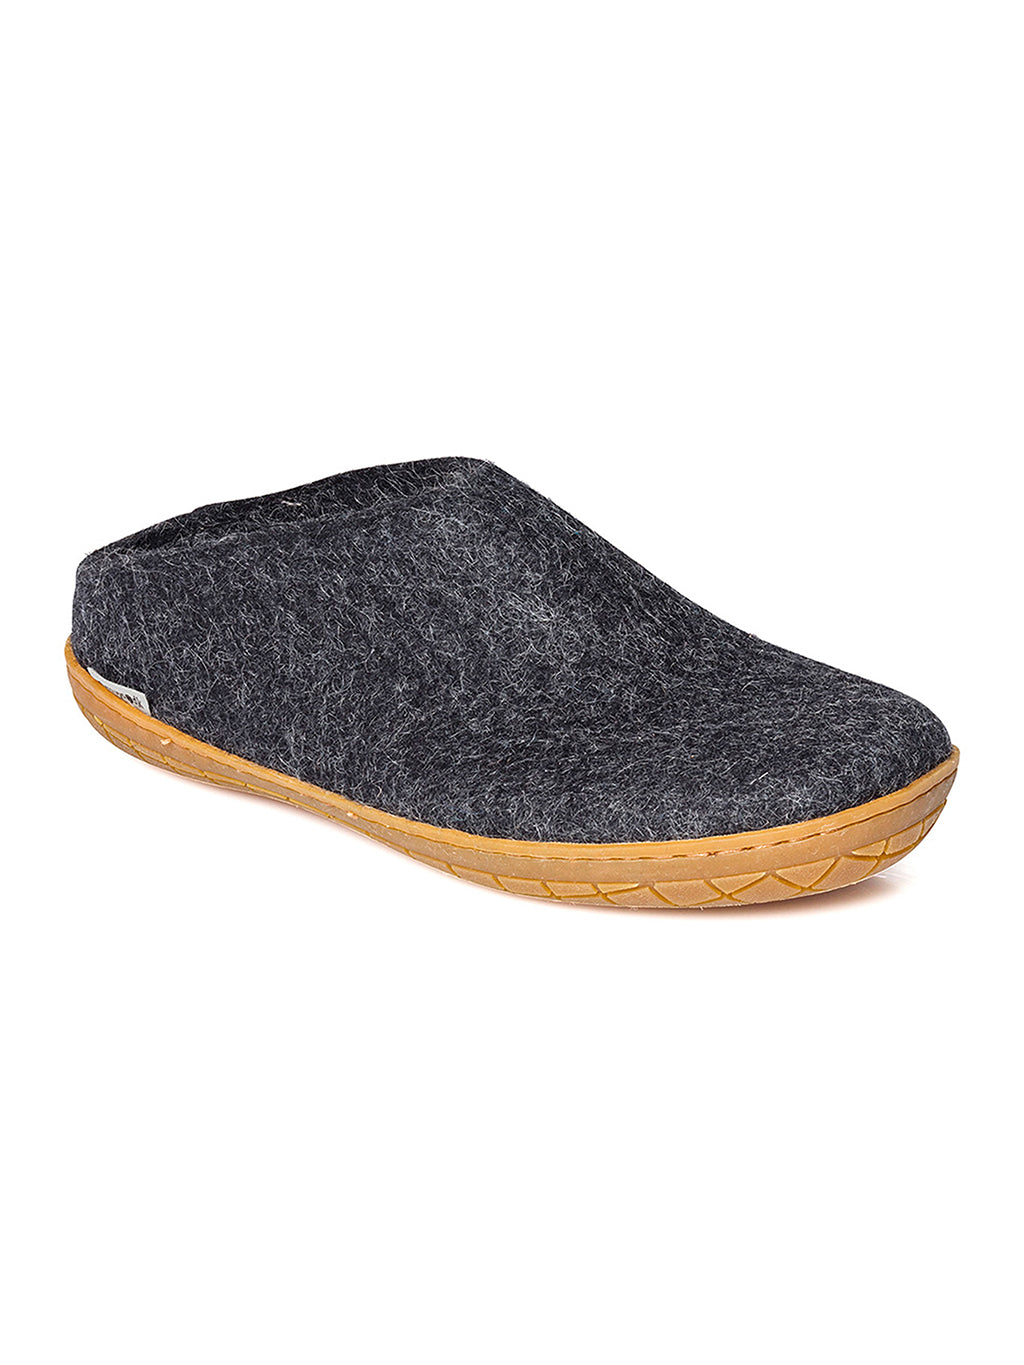 Black-coal wool slipper with rubber sole